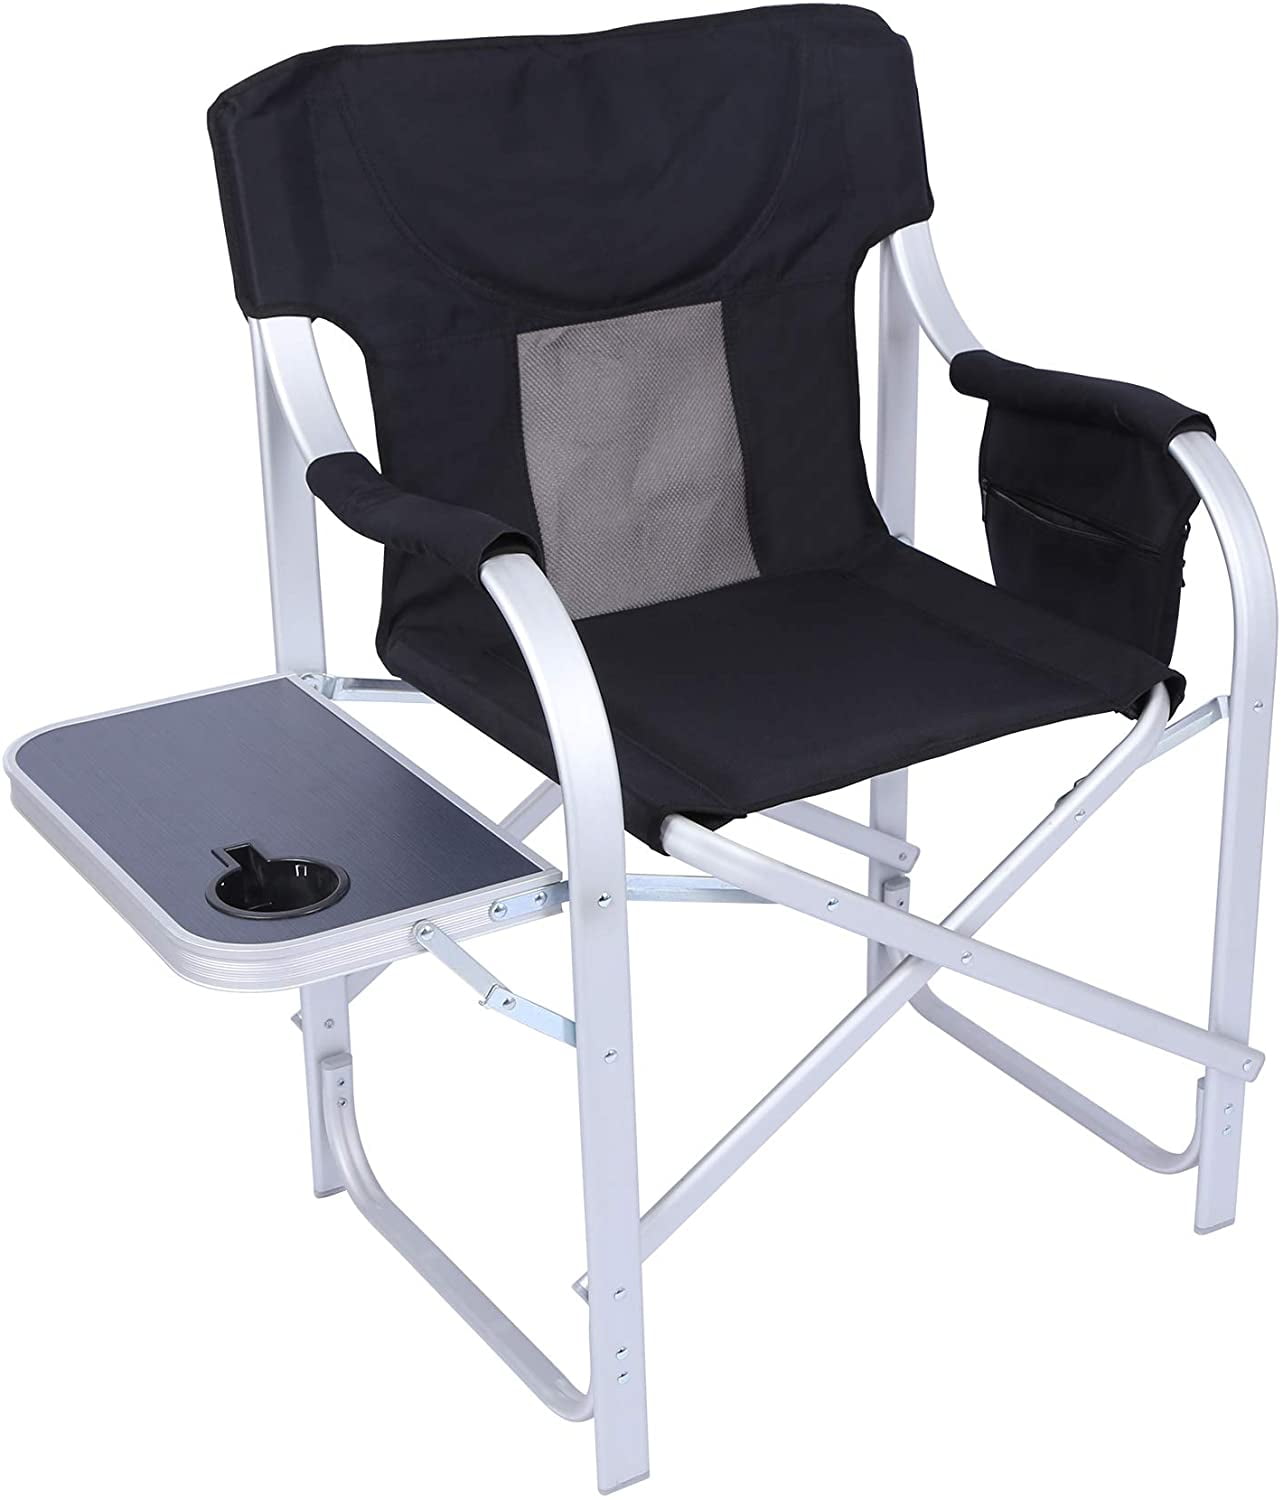 KingCamp Camping Chair Heavy Duty Folding Director Chair Oversize 